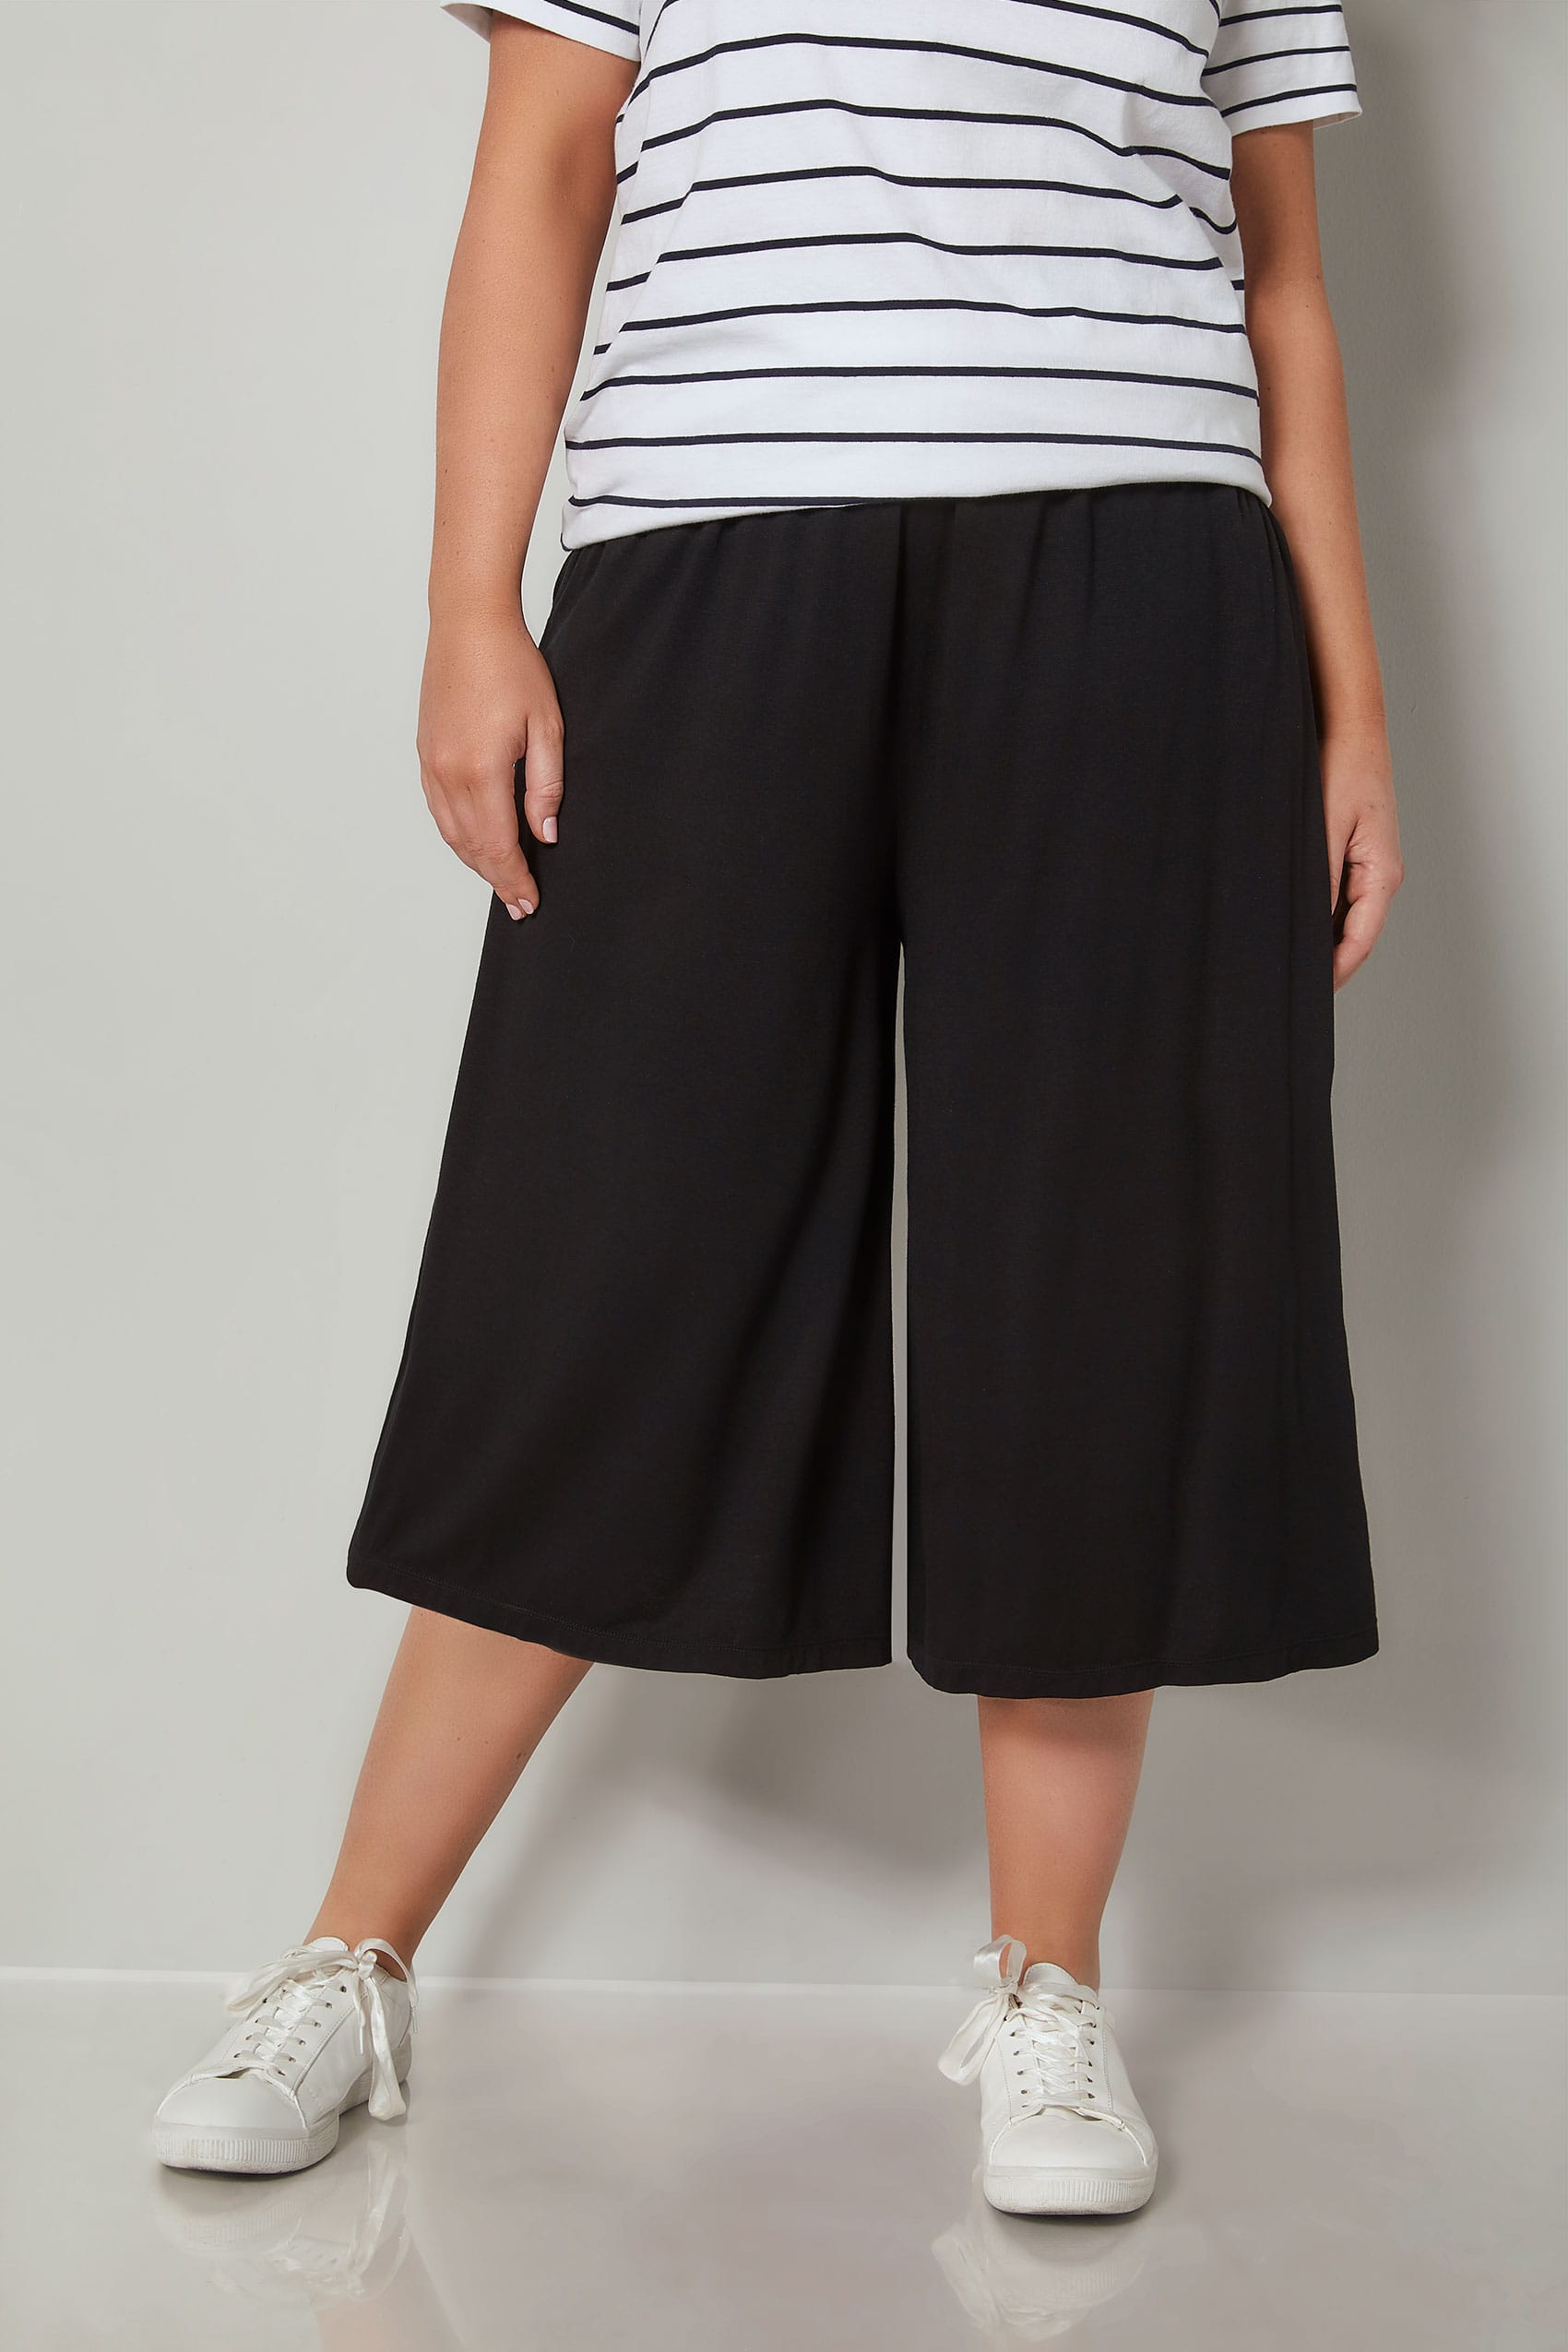 Black Jersey Culottes, plus size 16 to 